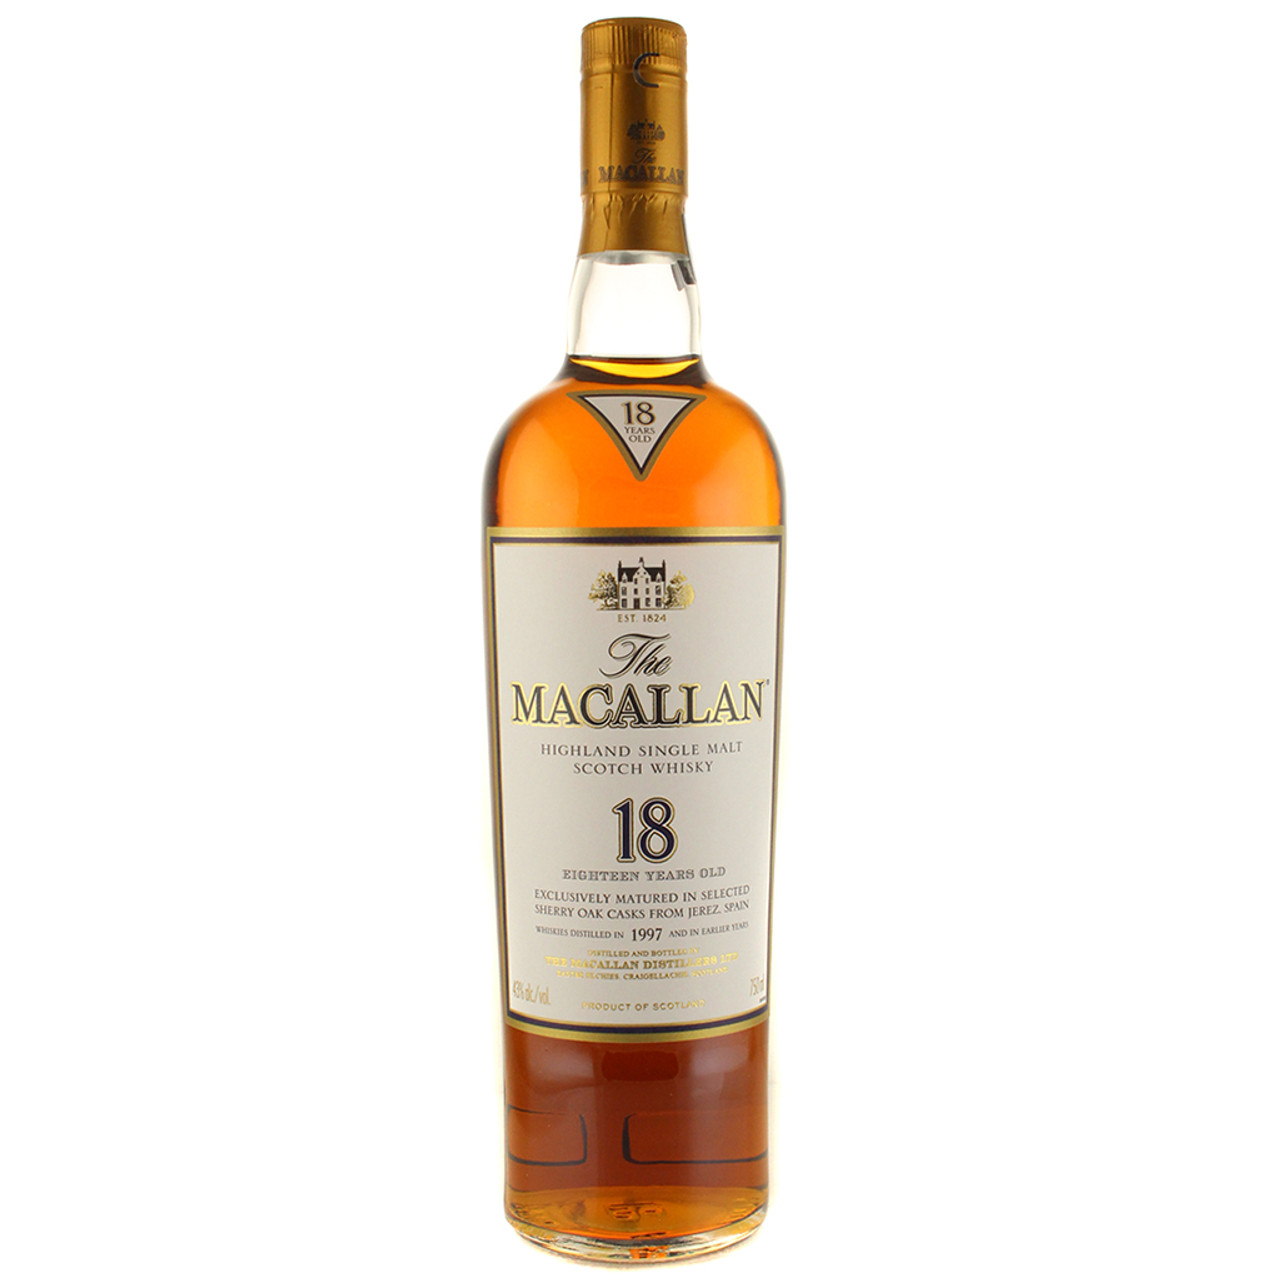 The Macallan Sherry Oak 18 Years Old Scotch Whisky (750ml)